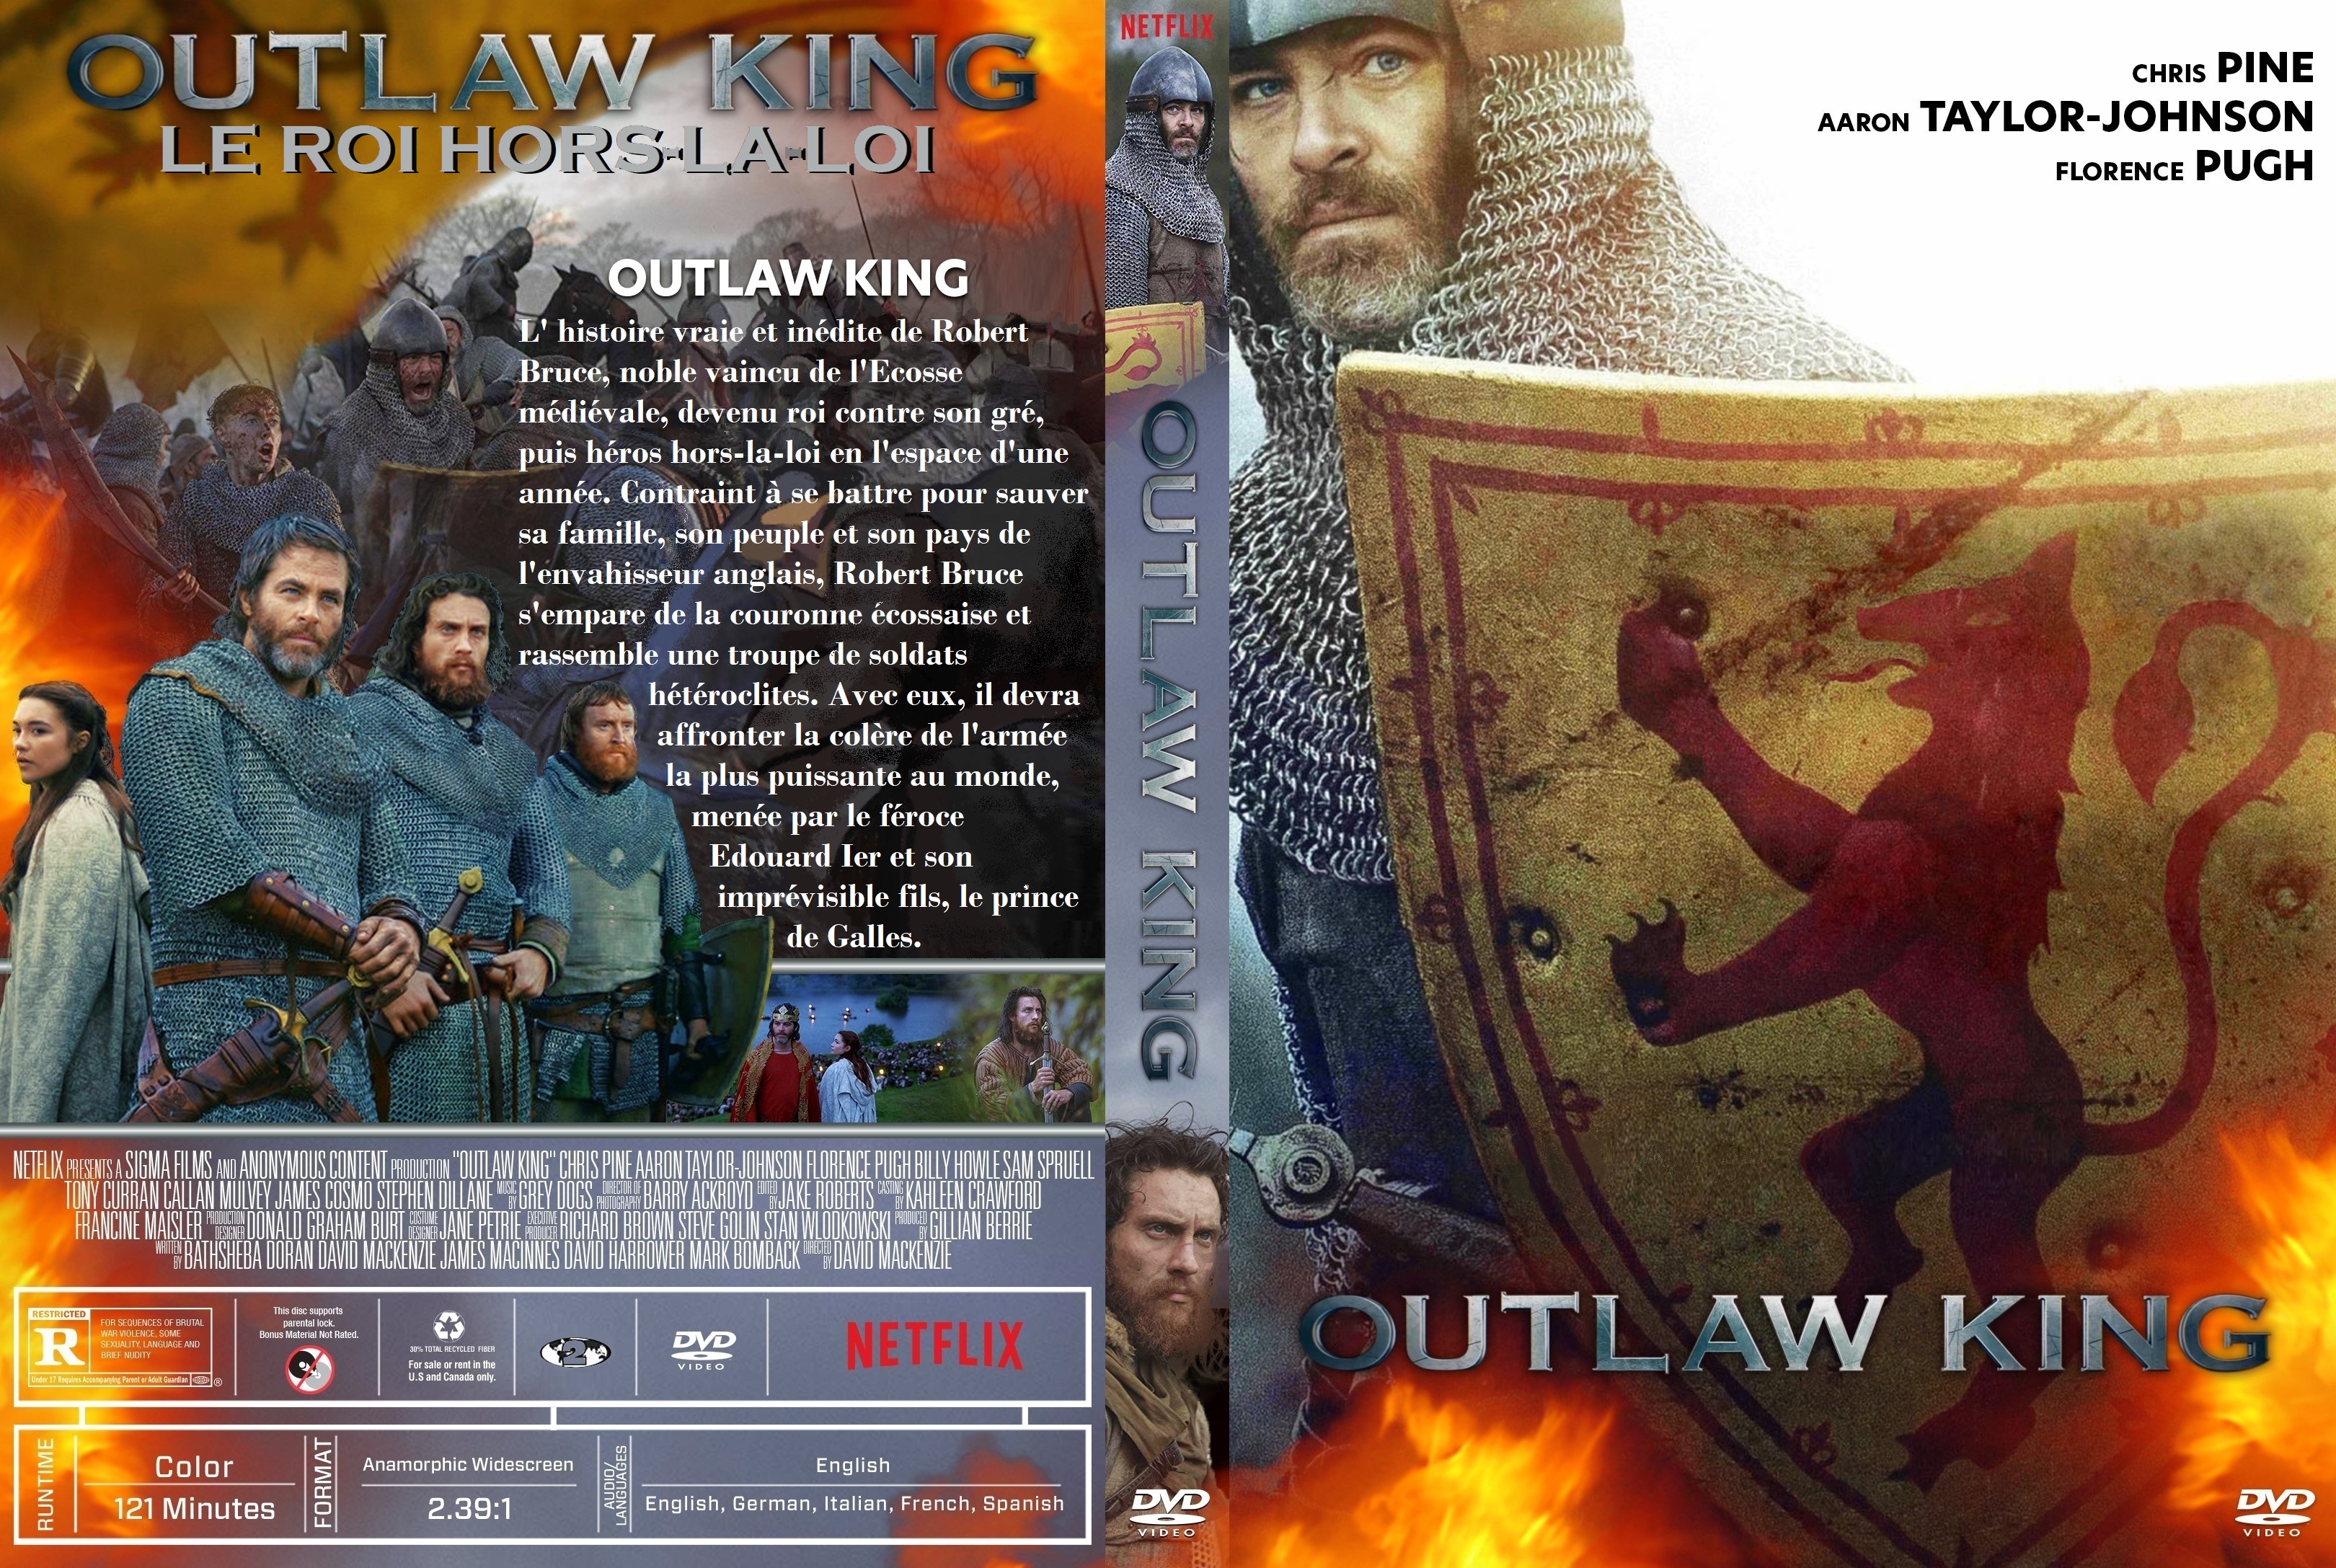 Jaquette DVD Outlaw King custom